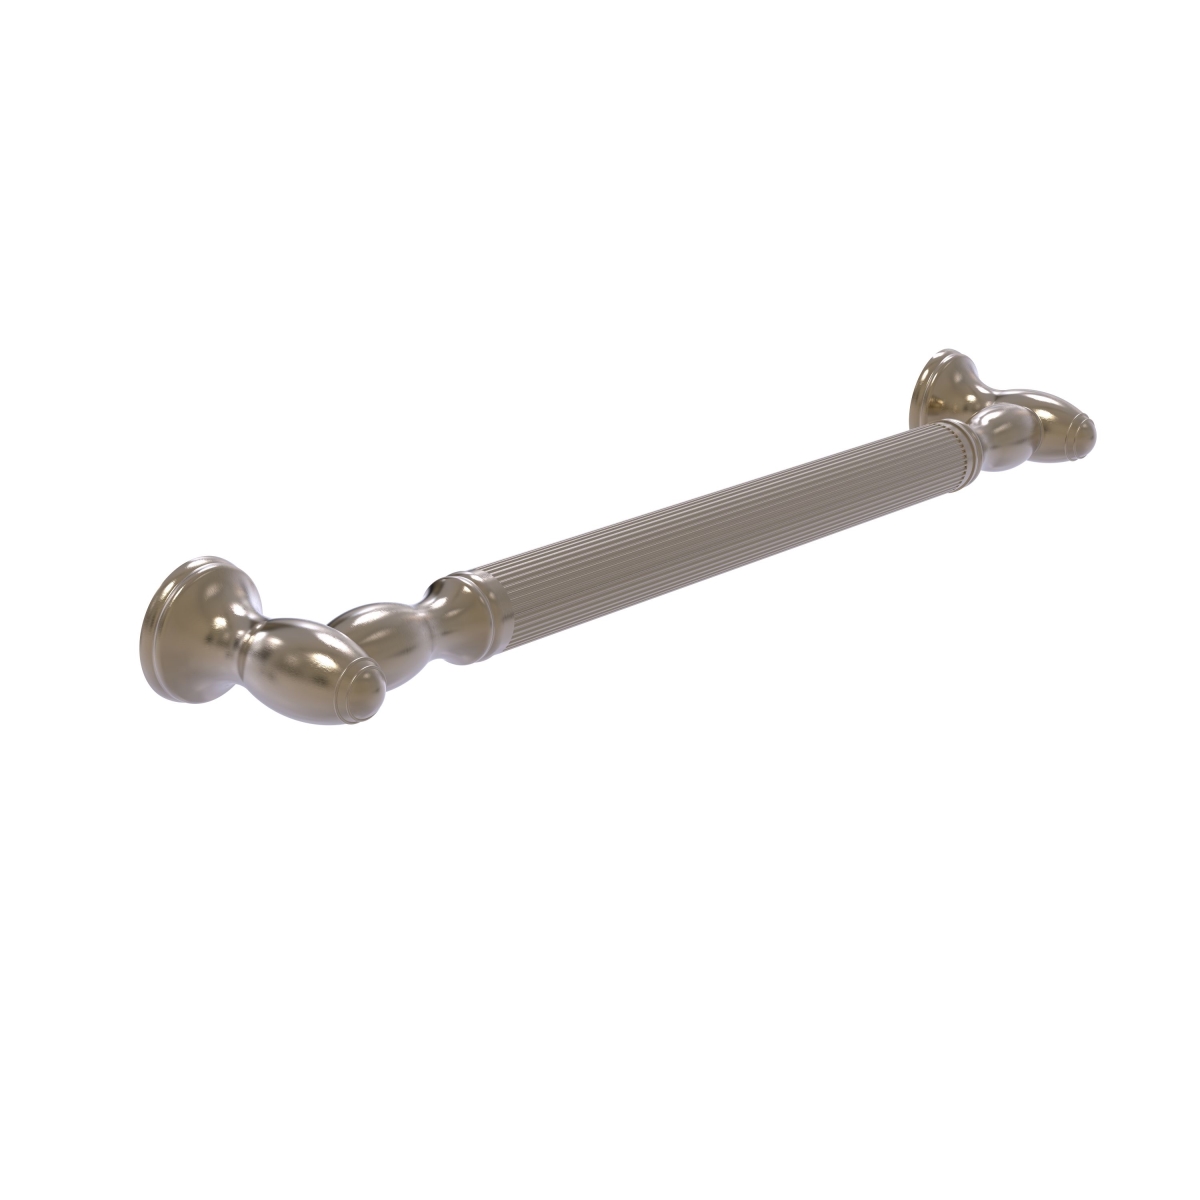 Picture of Allied Brass TD-GRR-32-PEW 32 in. Reeded Grab Bar, Antique Pewter - 3.5 x 34 x 32 in.